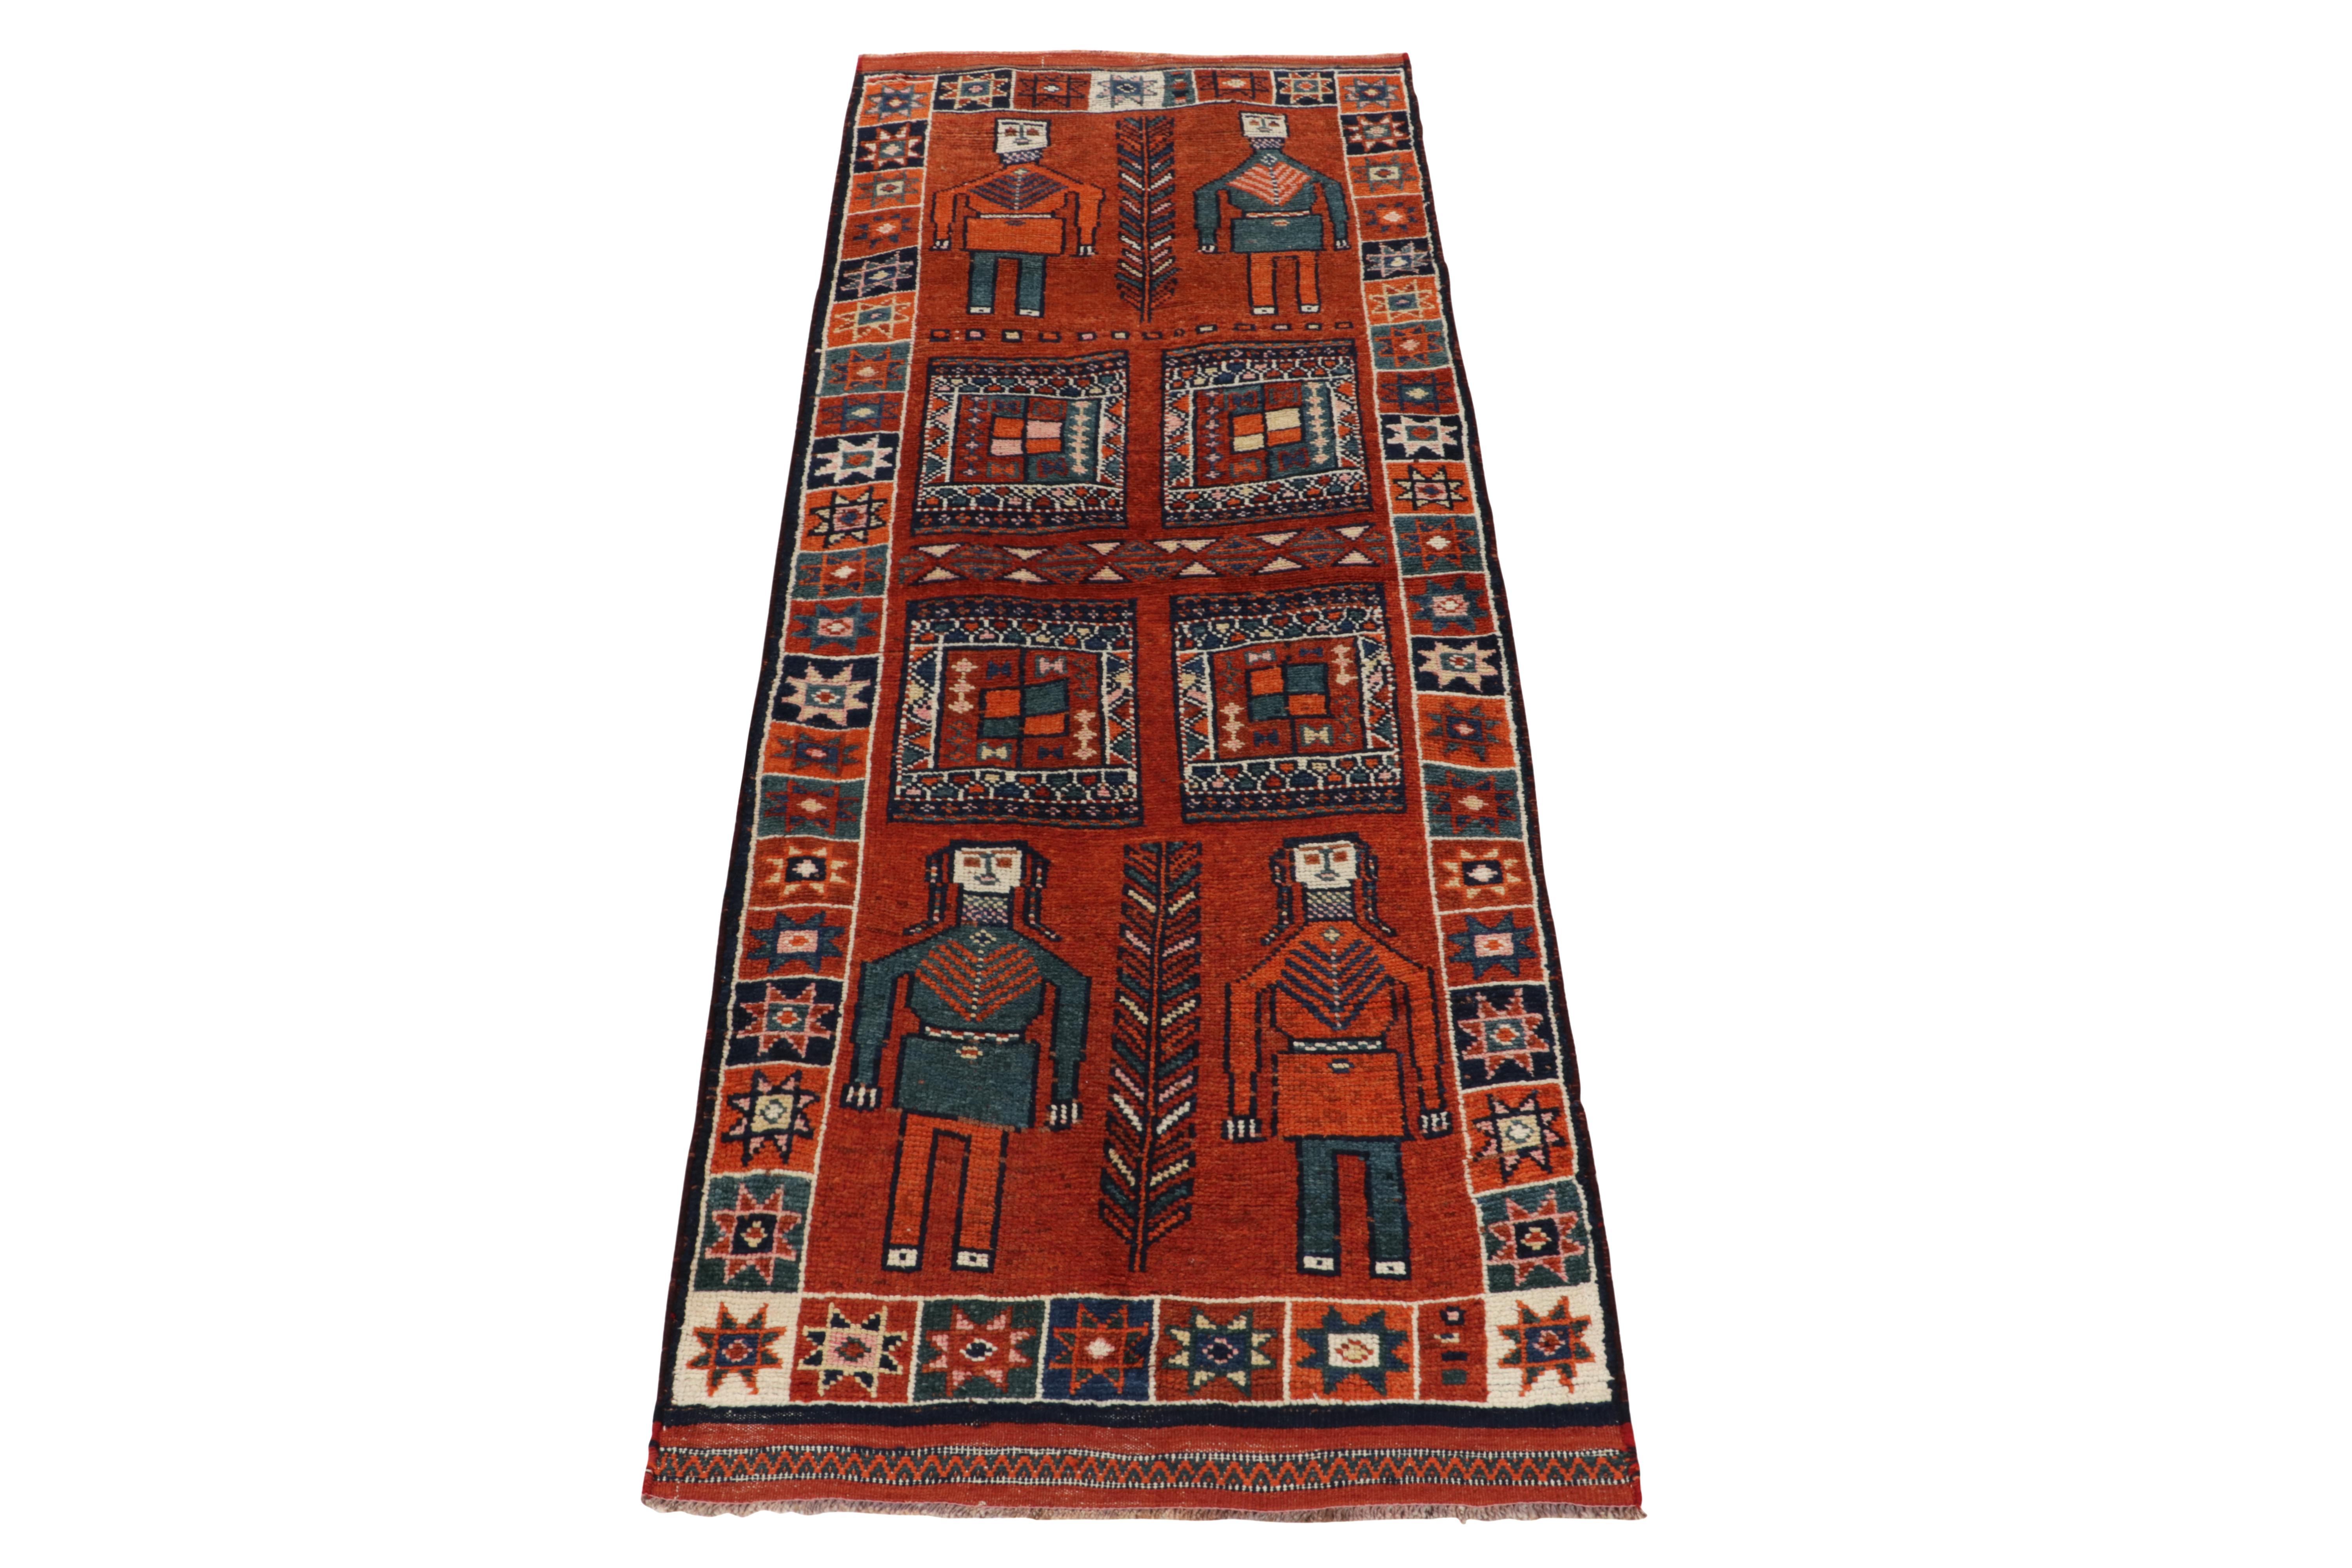 Hand-knotted in wool, a 4x11 rug from Rug & Kilim’s newly unveiled curation of rare tribal pieces. Originating from Turkey circa 1950-1960, a graphic piece as collectible as it is decorative. 

The design enjoys human pictorials & geometric